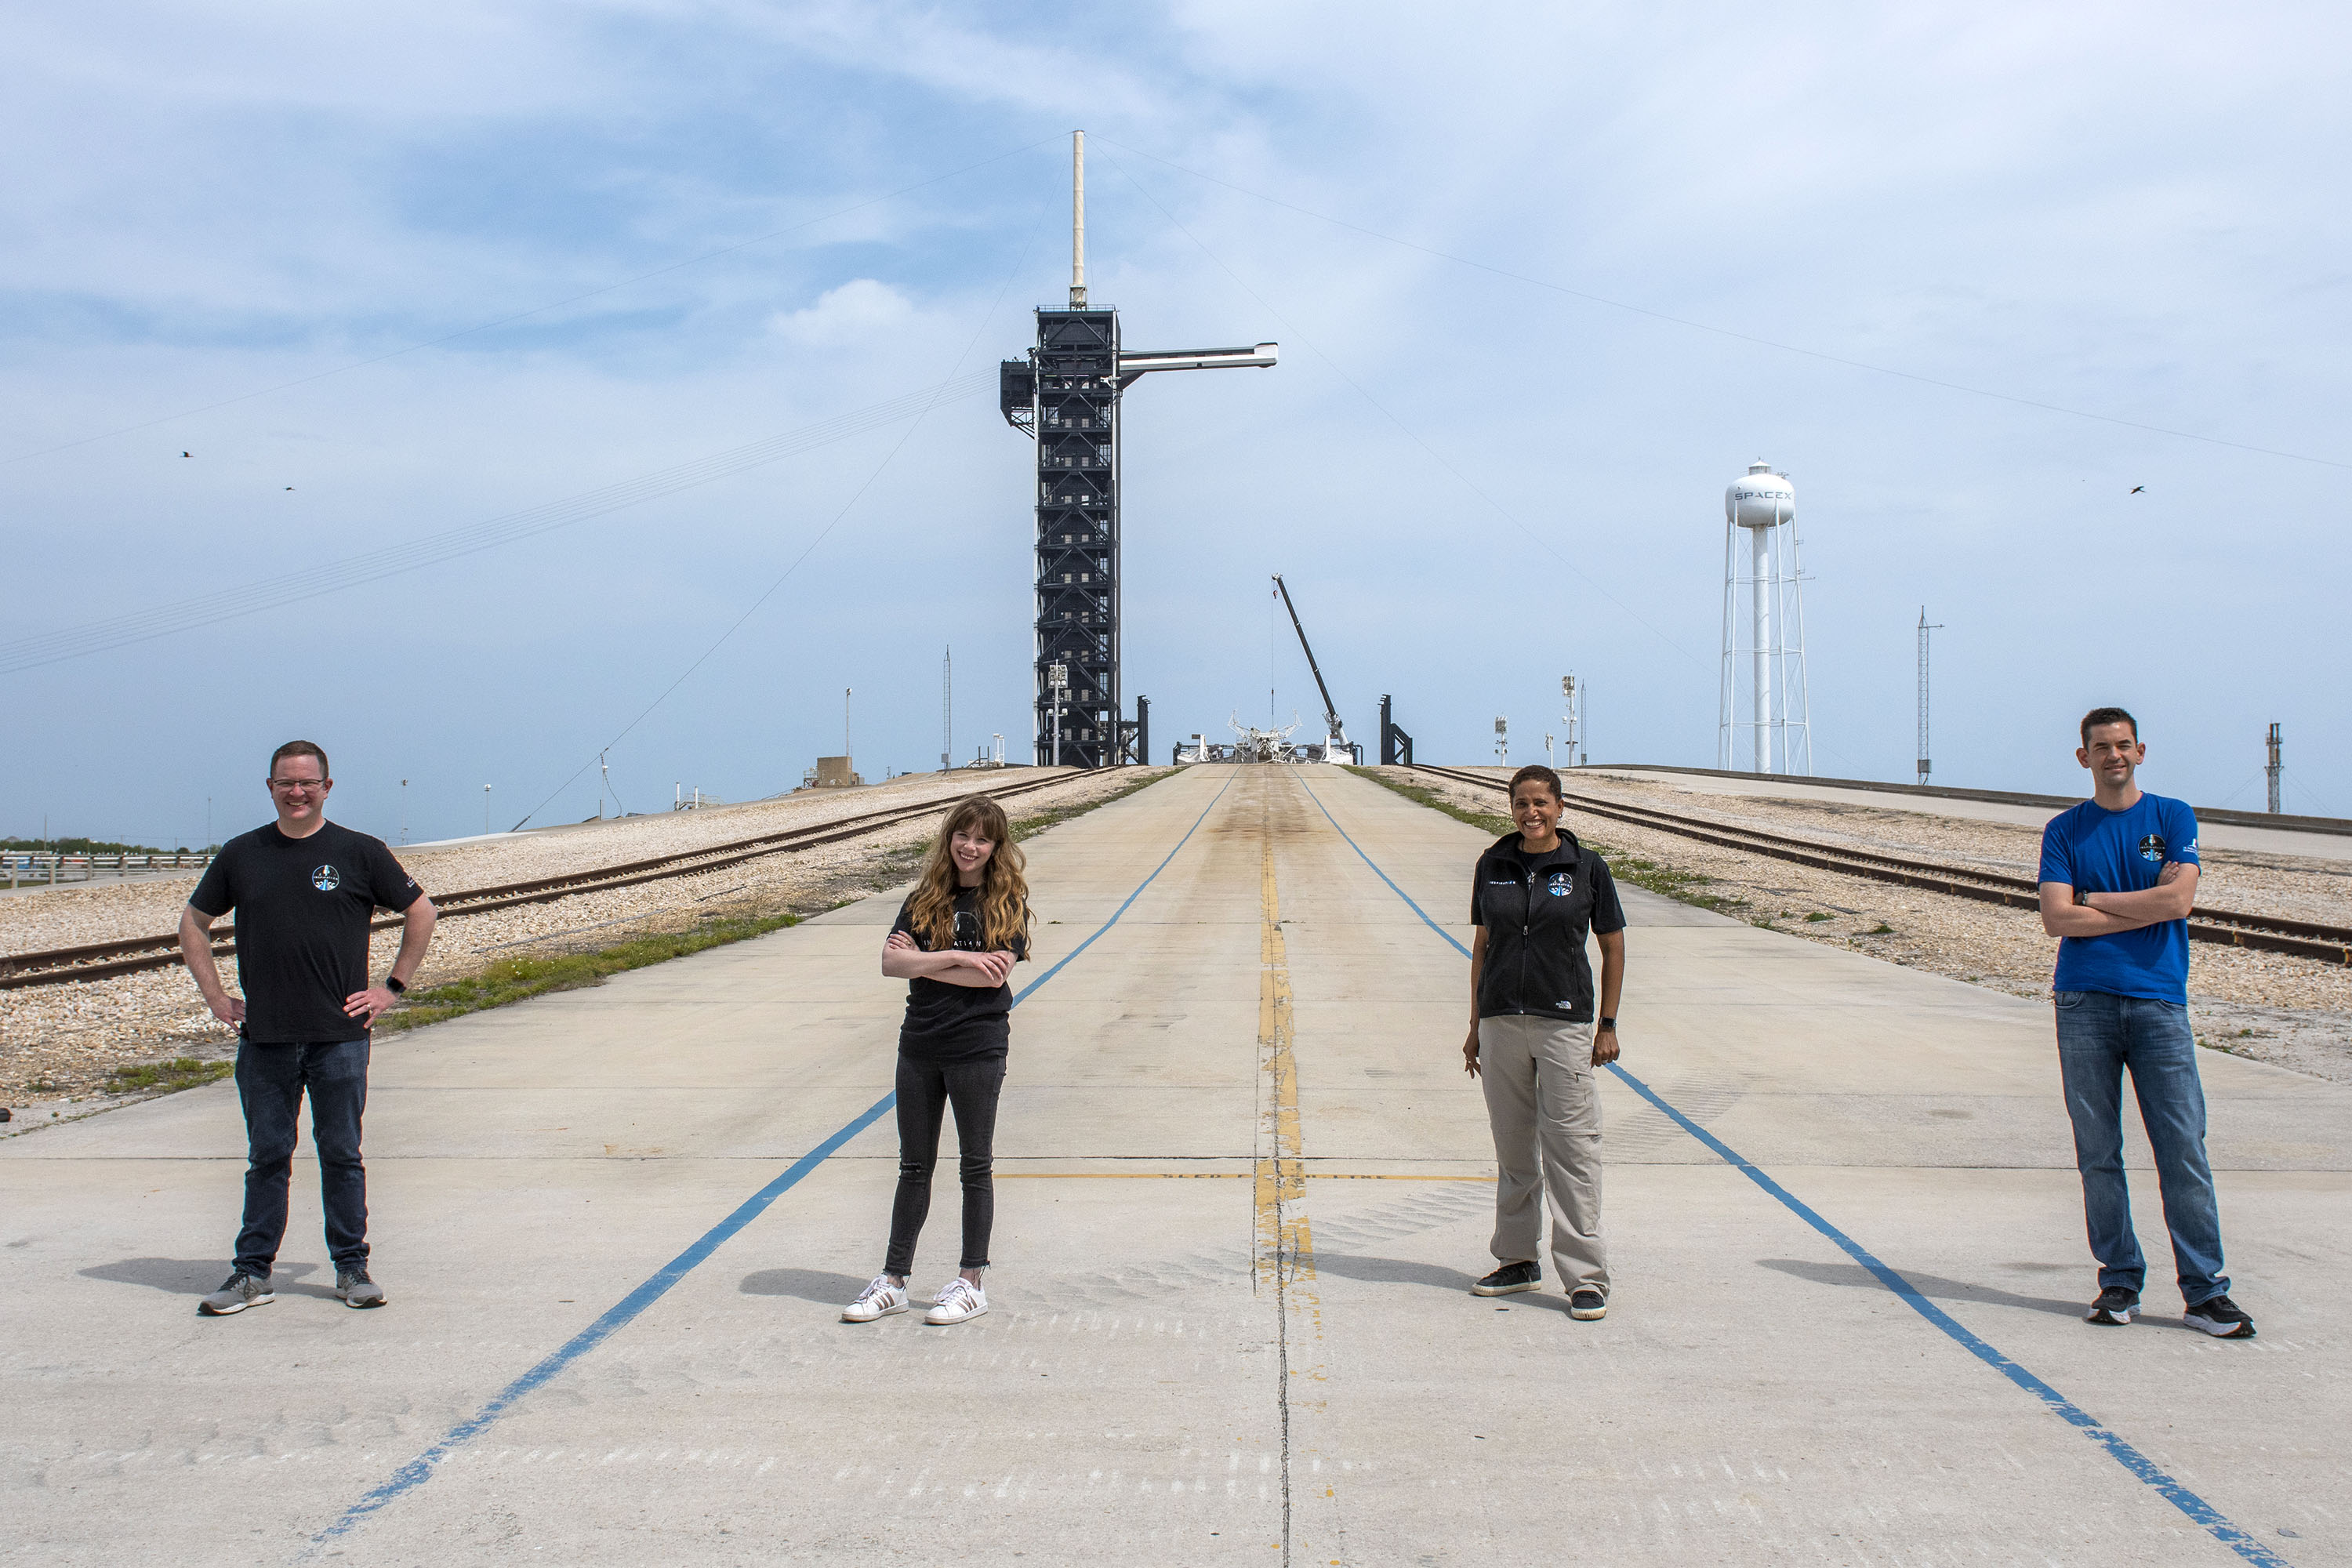 Inspiration4 Announces Winners That Will Launch Aboard SpaceX’s First All-Civilian Crew